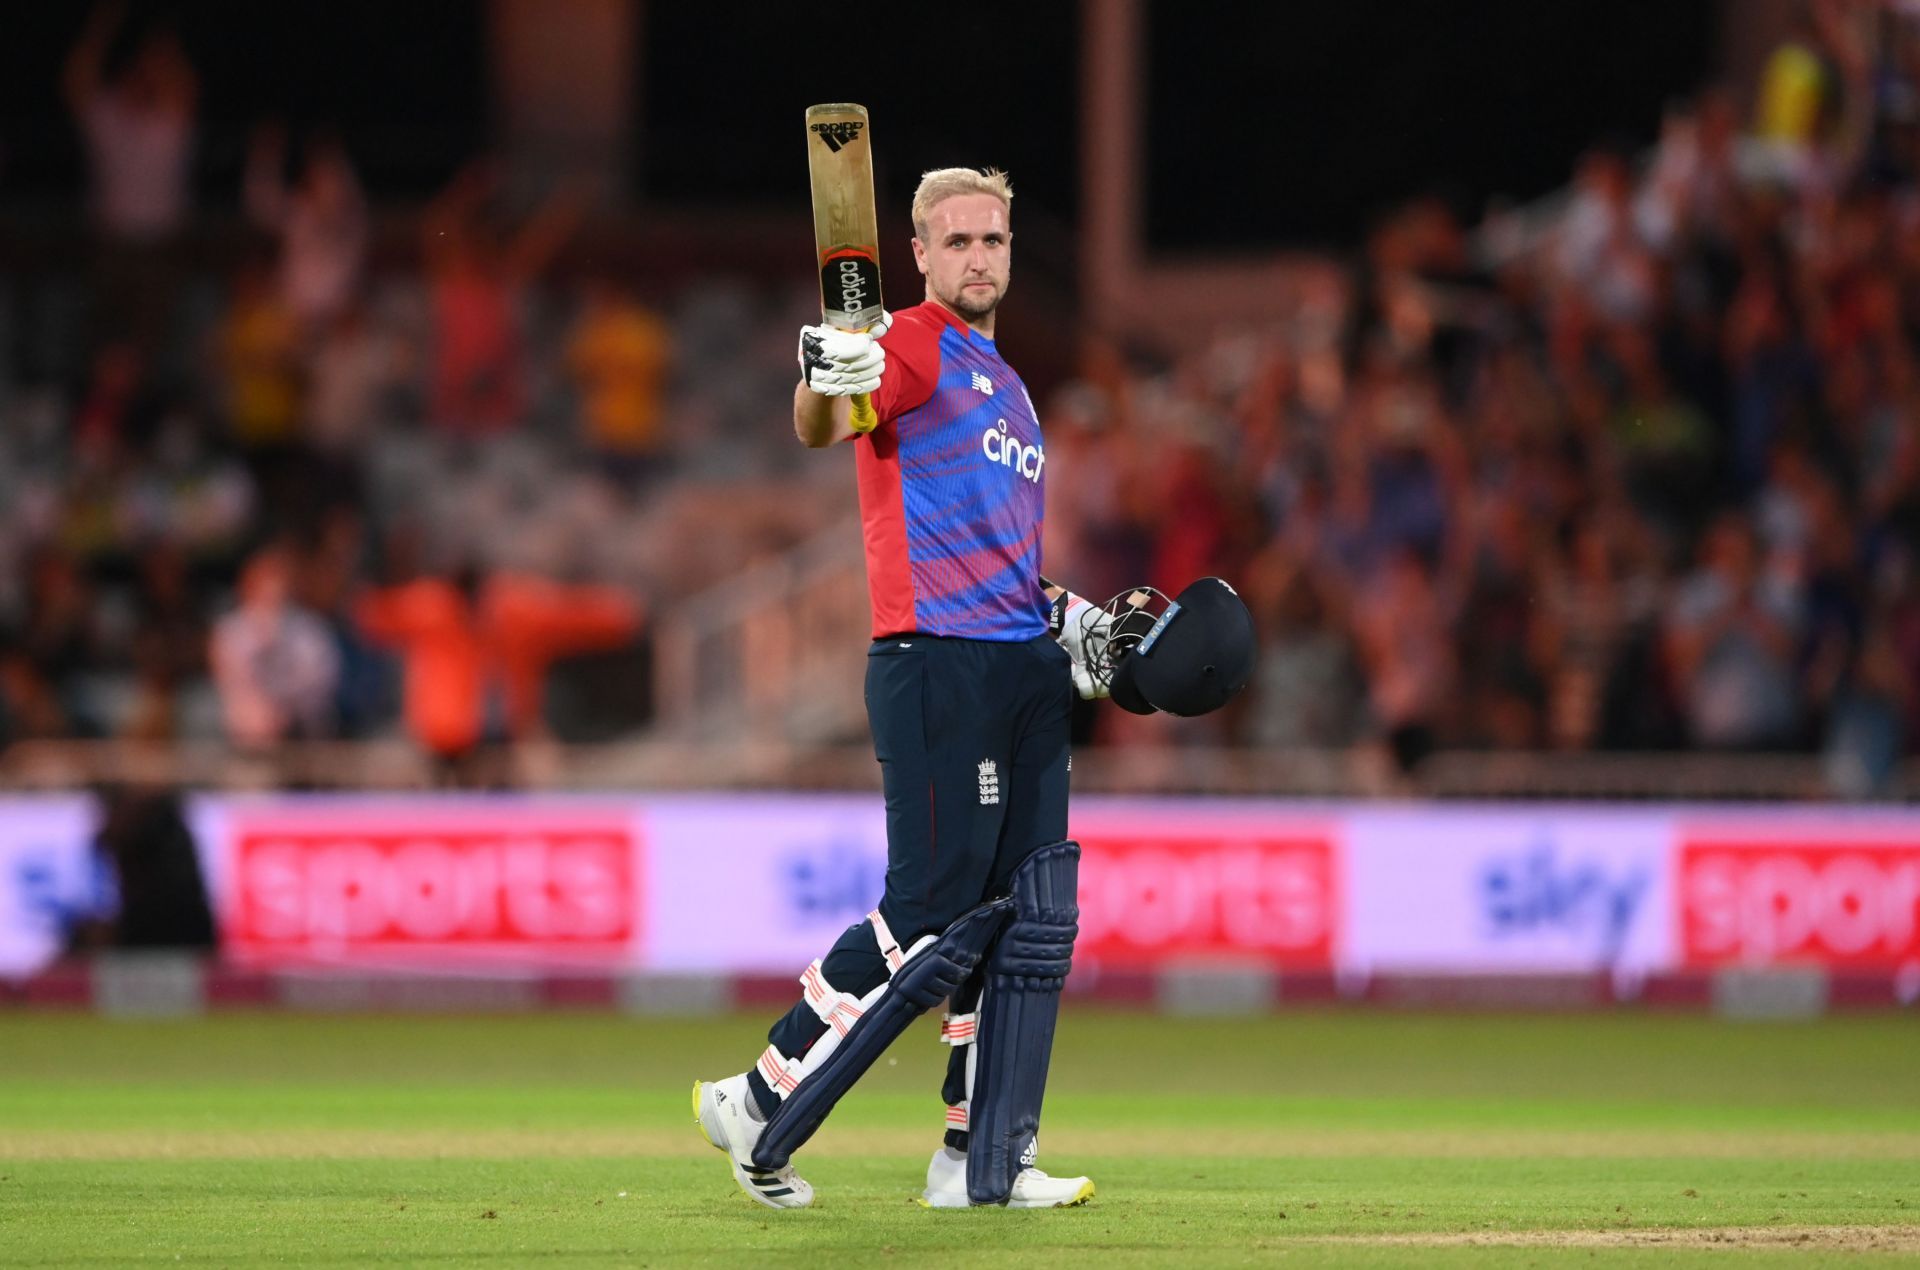 Liam Livingstone has the fastest T20 hundred for England. (Credits: Getty)